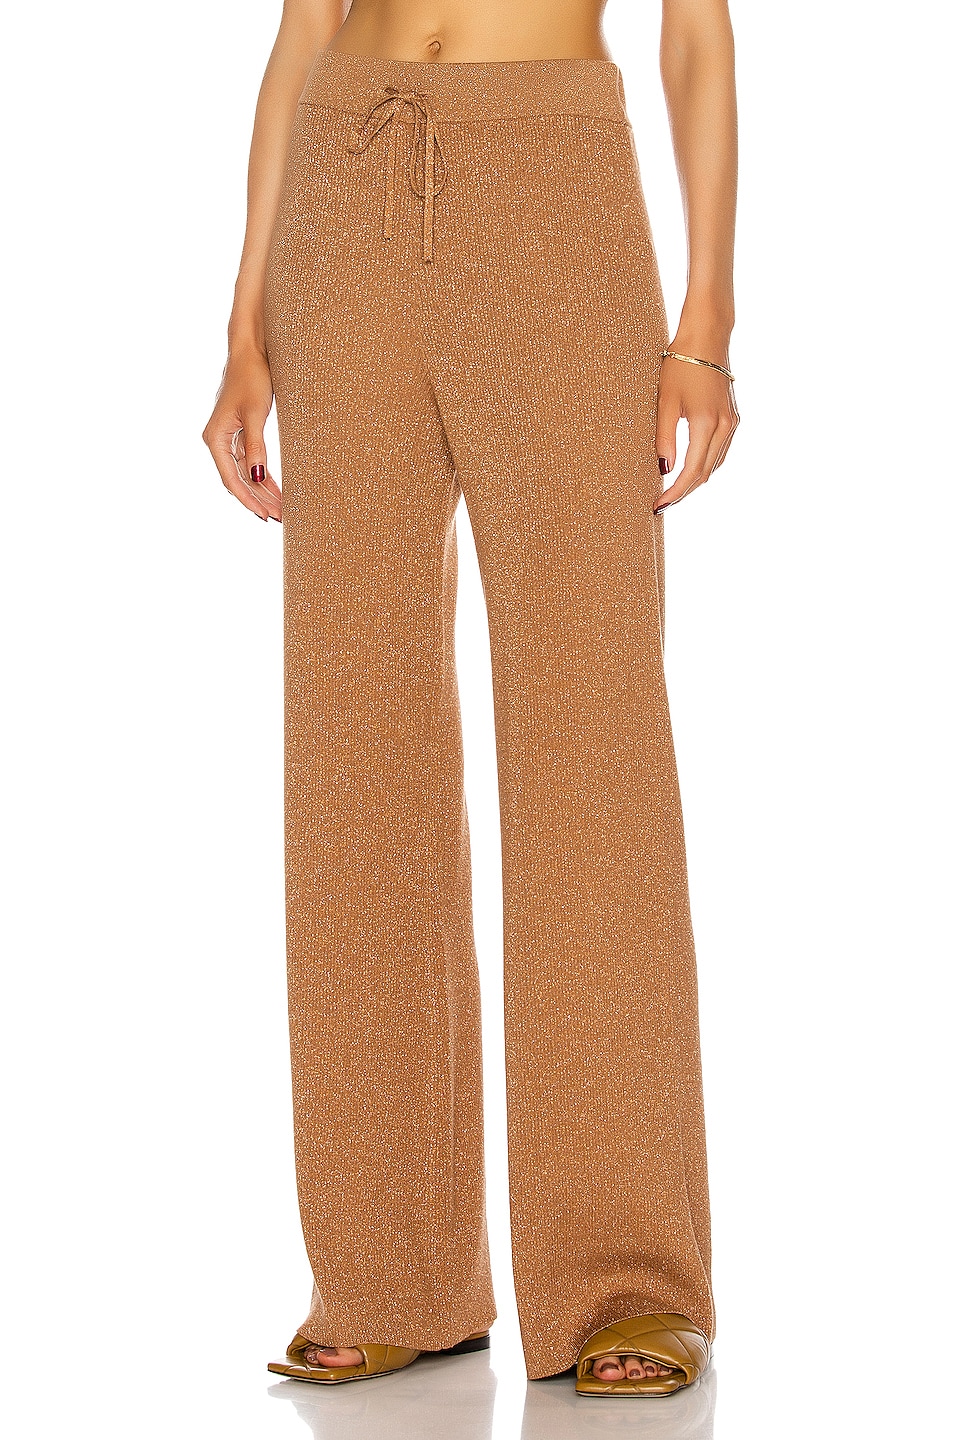 Image 1 of A.L.C. Quentin Pant in Toffee & Rose Gold